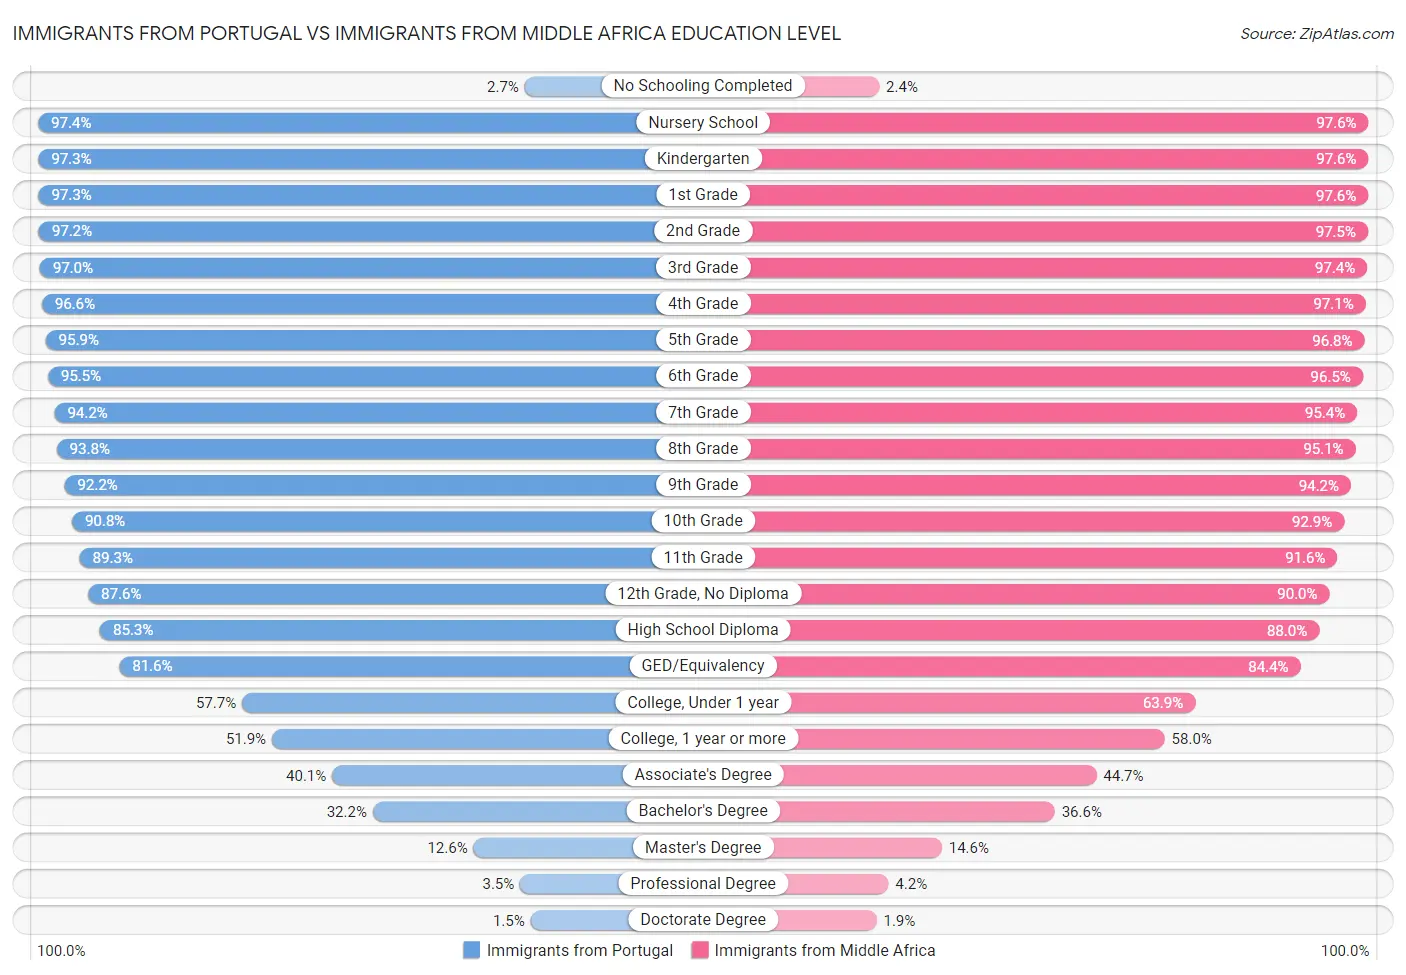 Immigrants from Portugal vs Immigrants from Middle Africa Education Level